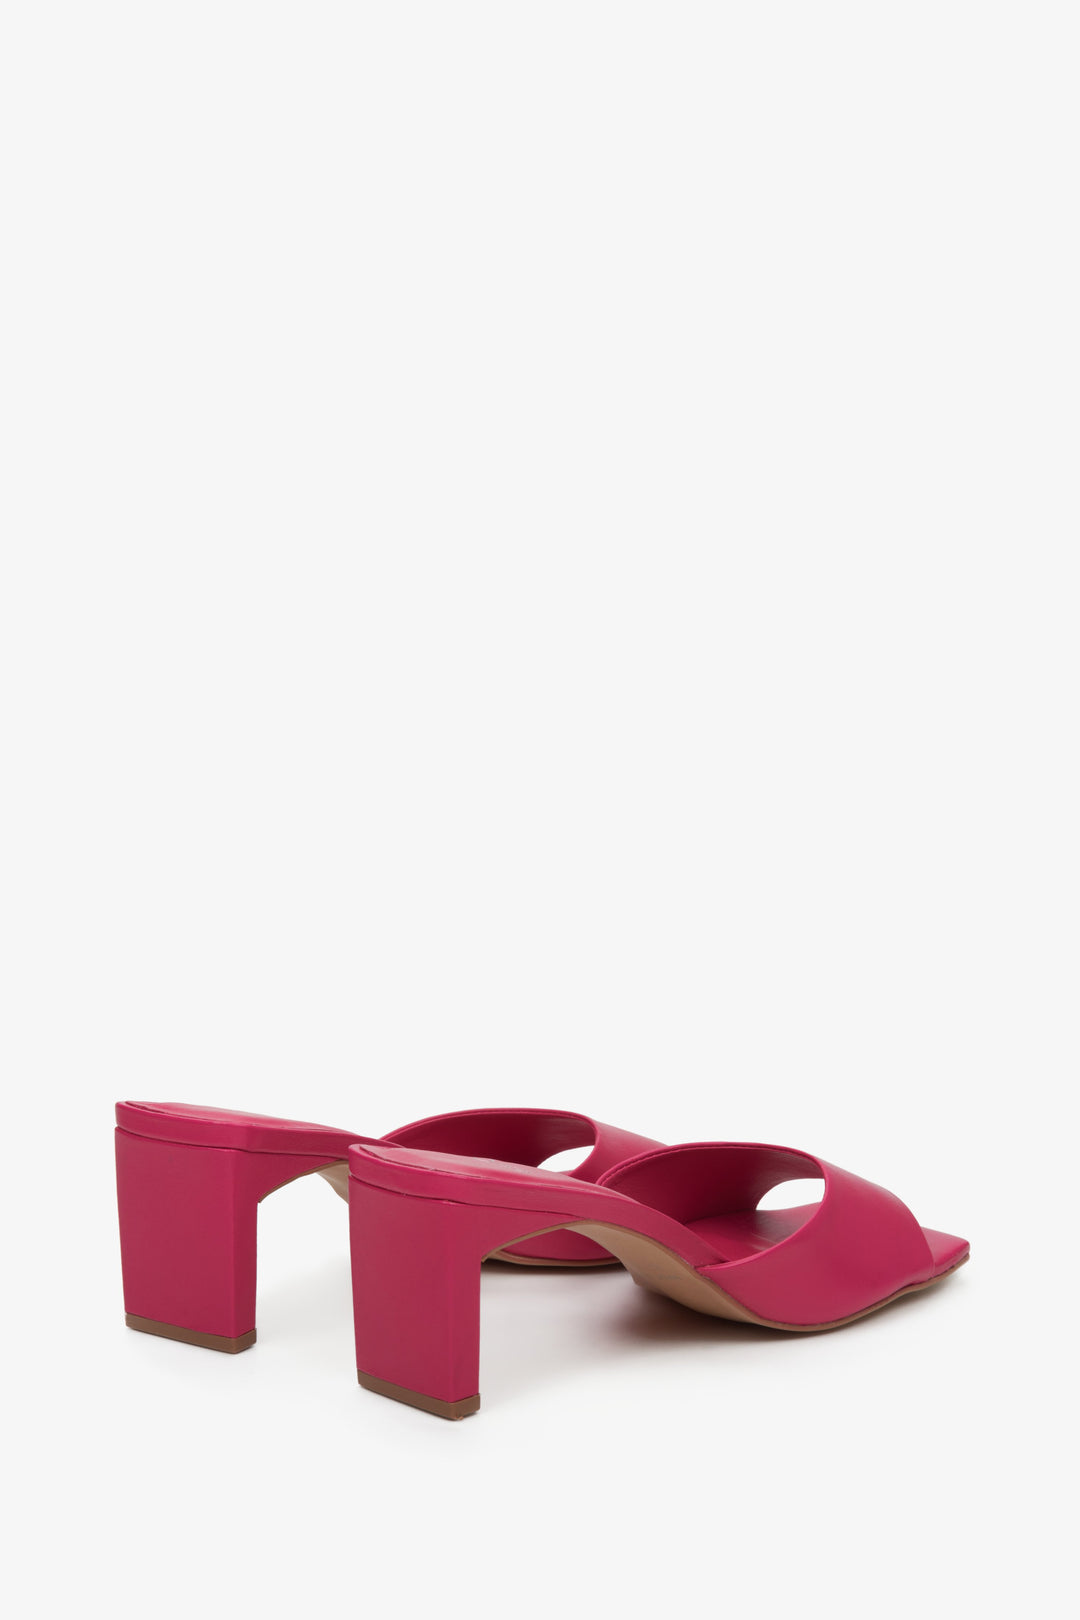 Women's pink Estro mules made of Italian genuine leather with a sturdy heel.